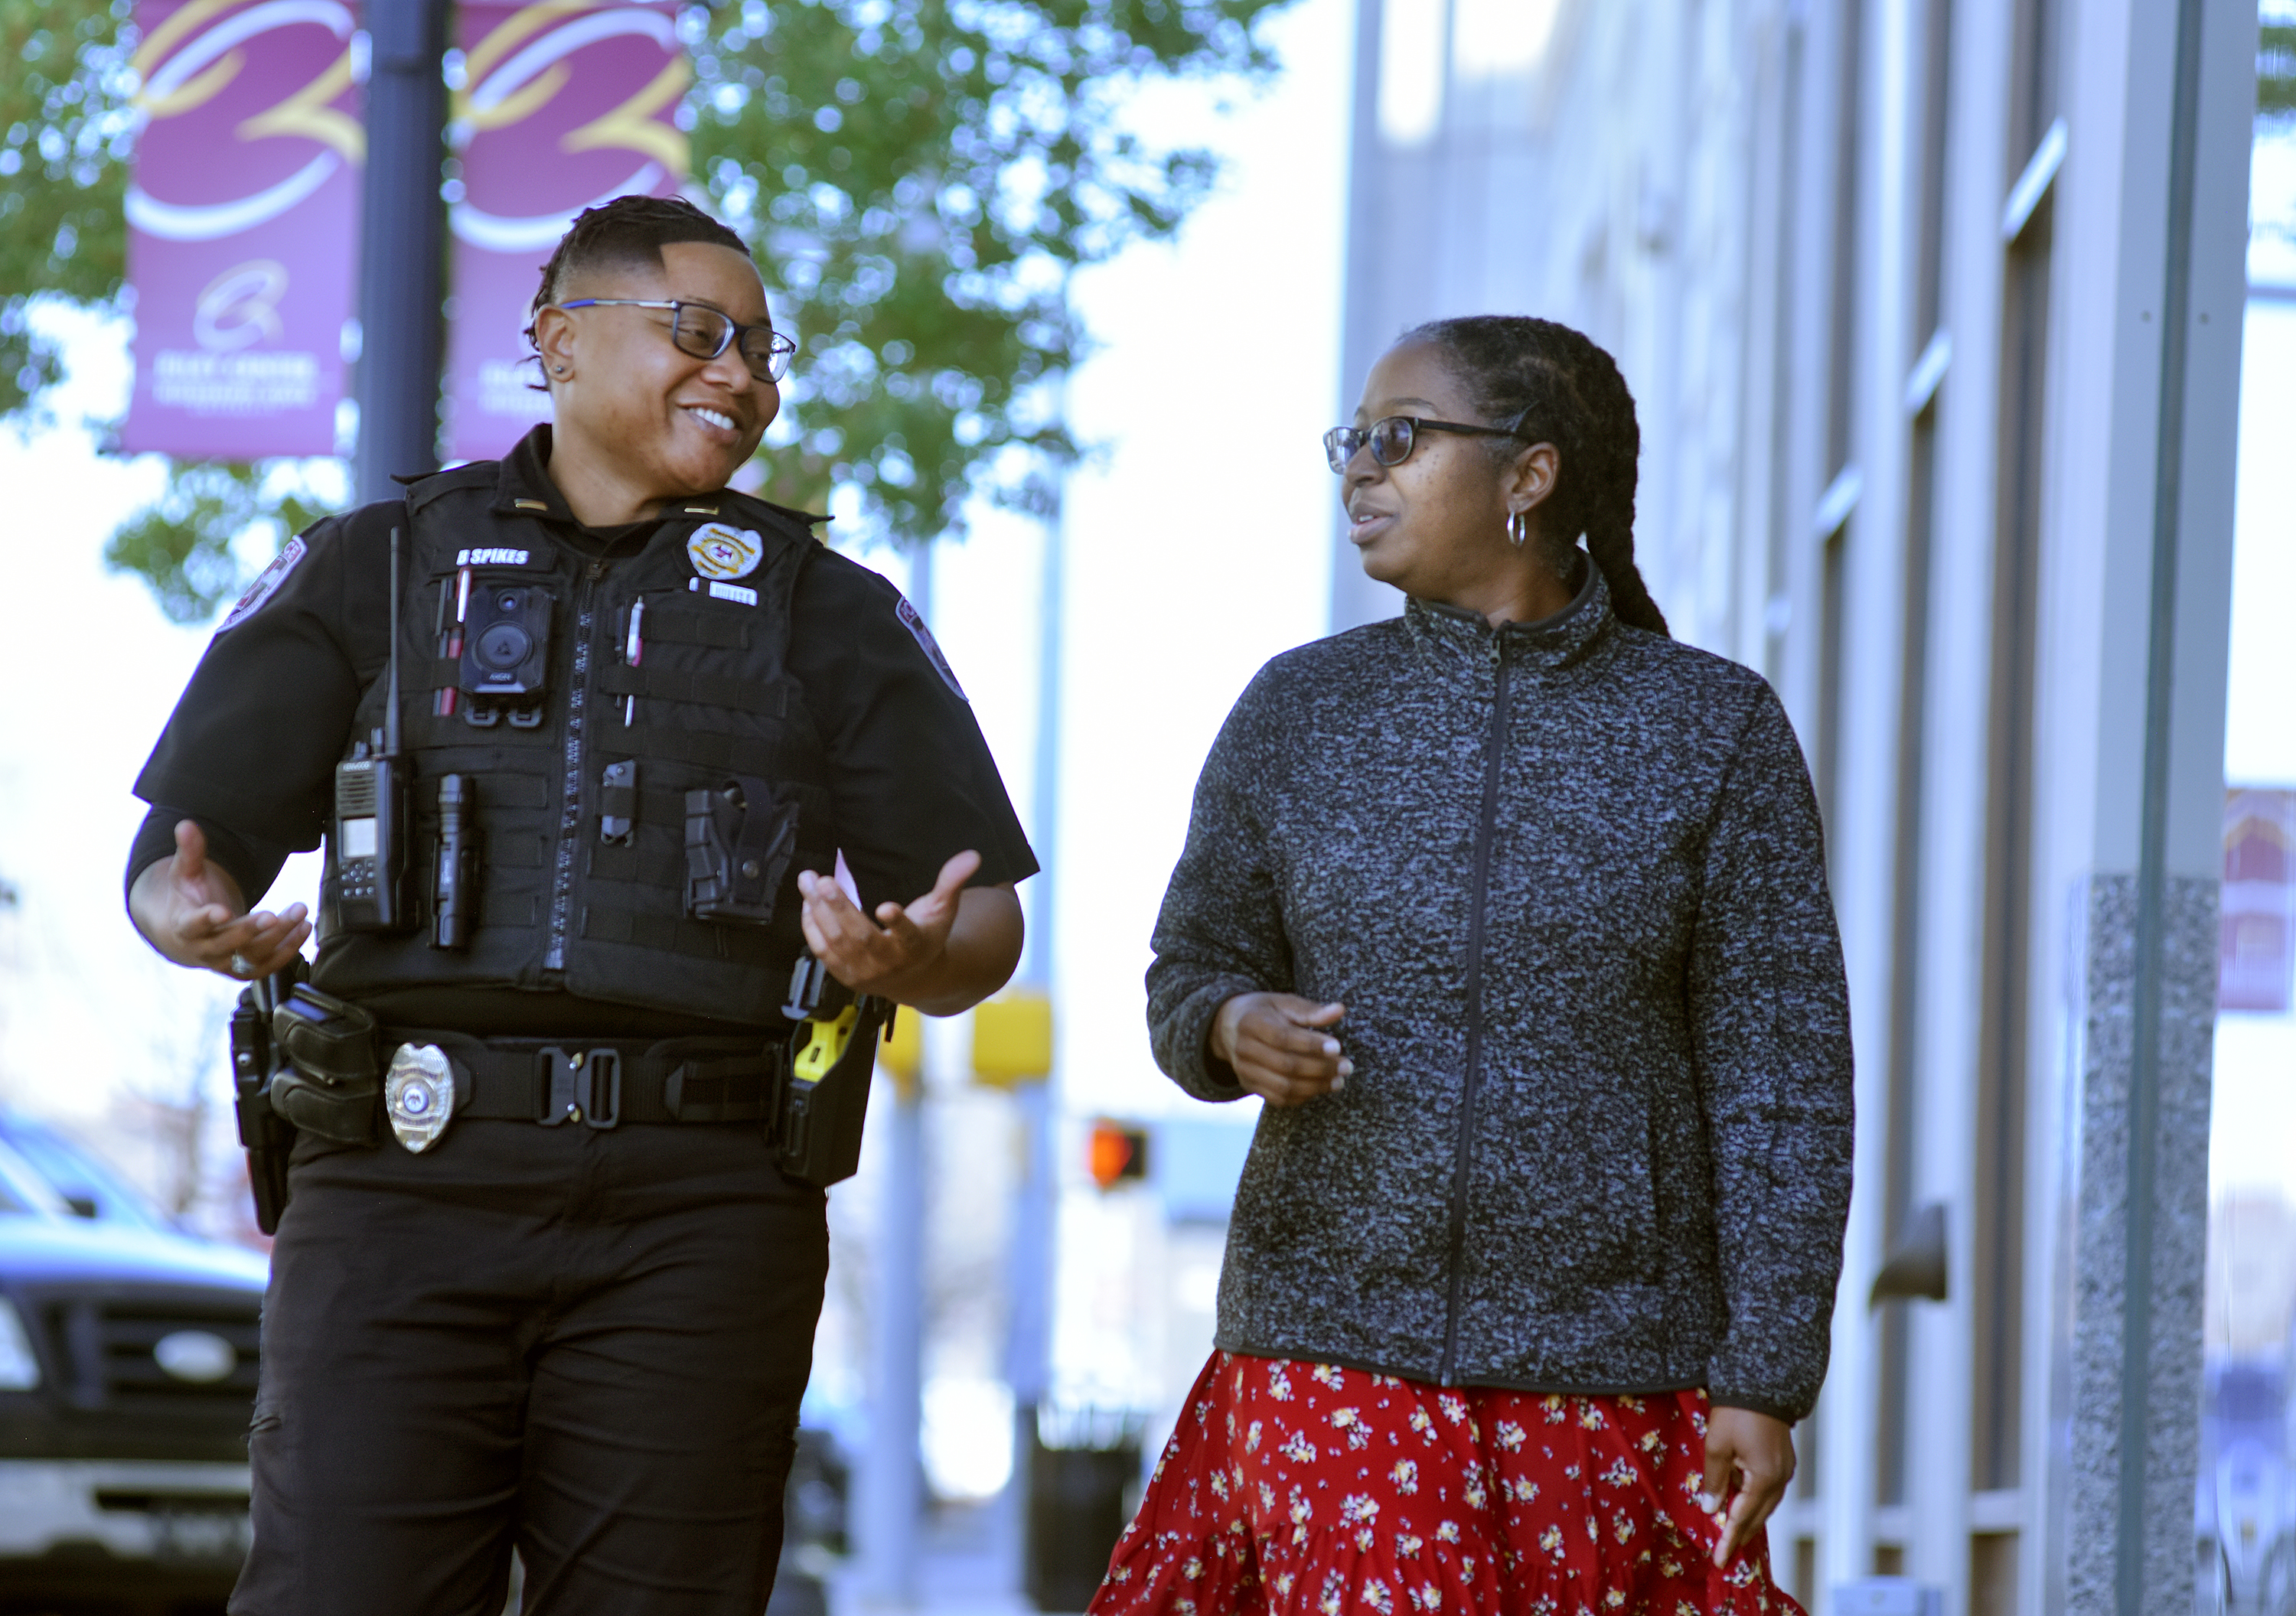 Lt. Breonne Spikes talks with Natasha Major, a student of MSU-Meridian’s Master of Physician Assistant Studies program in downtown Meridian. As the campus evolves in the downtown area, MSU-Meridian police are taking a proactive approach to student safety with the recently begun “Don’t Walk Alone” program.